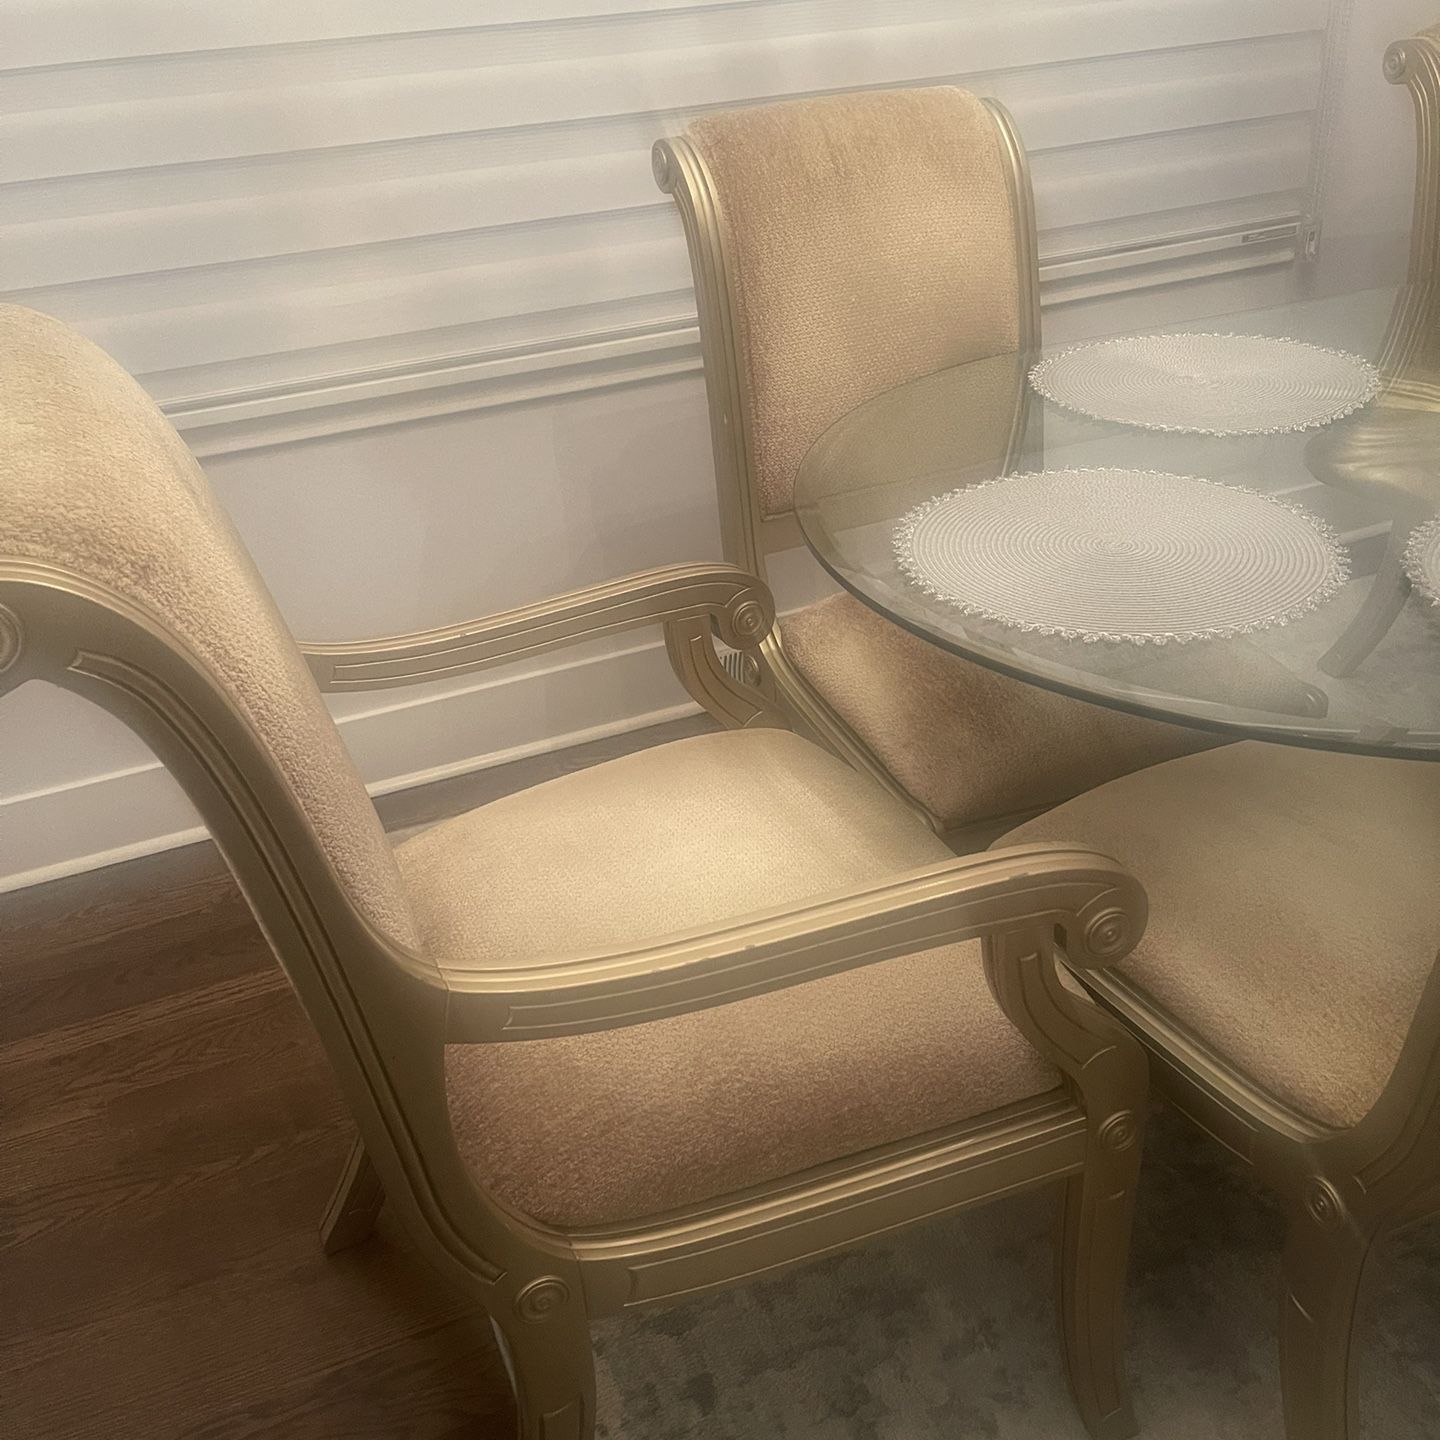  Table With 6 Chairs Very Good Condition With Mirror Good Condition Only For $799.99